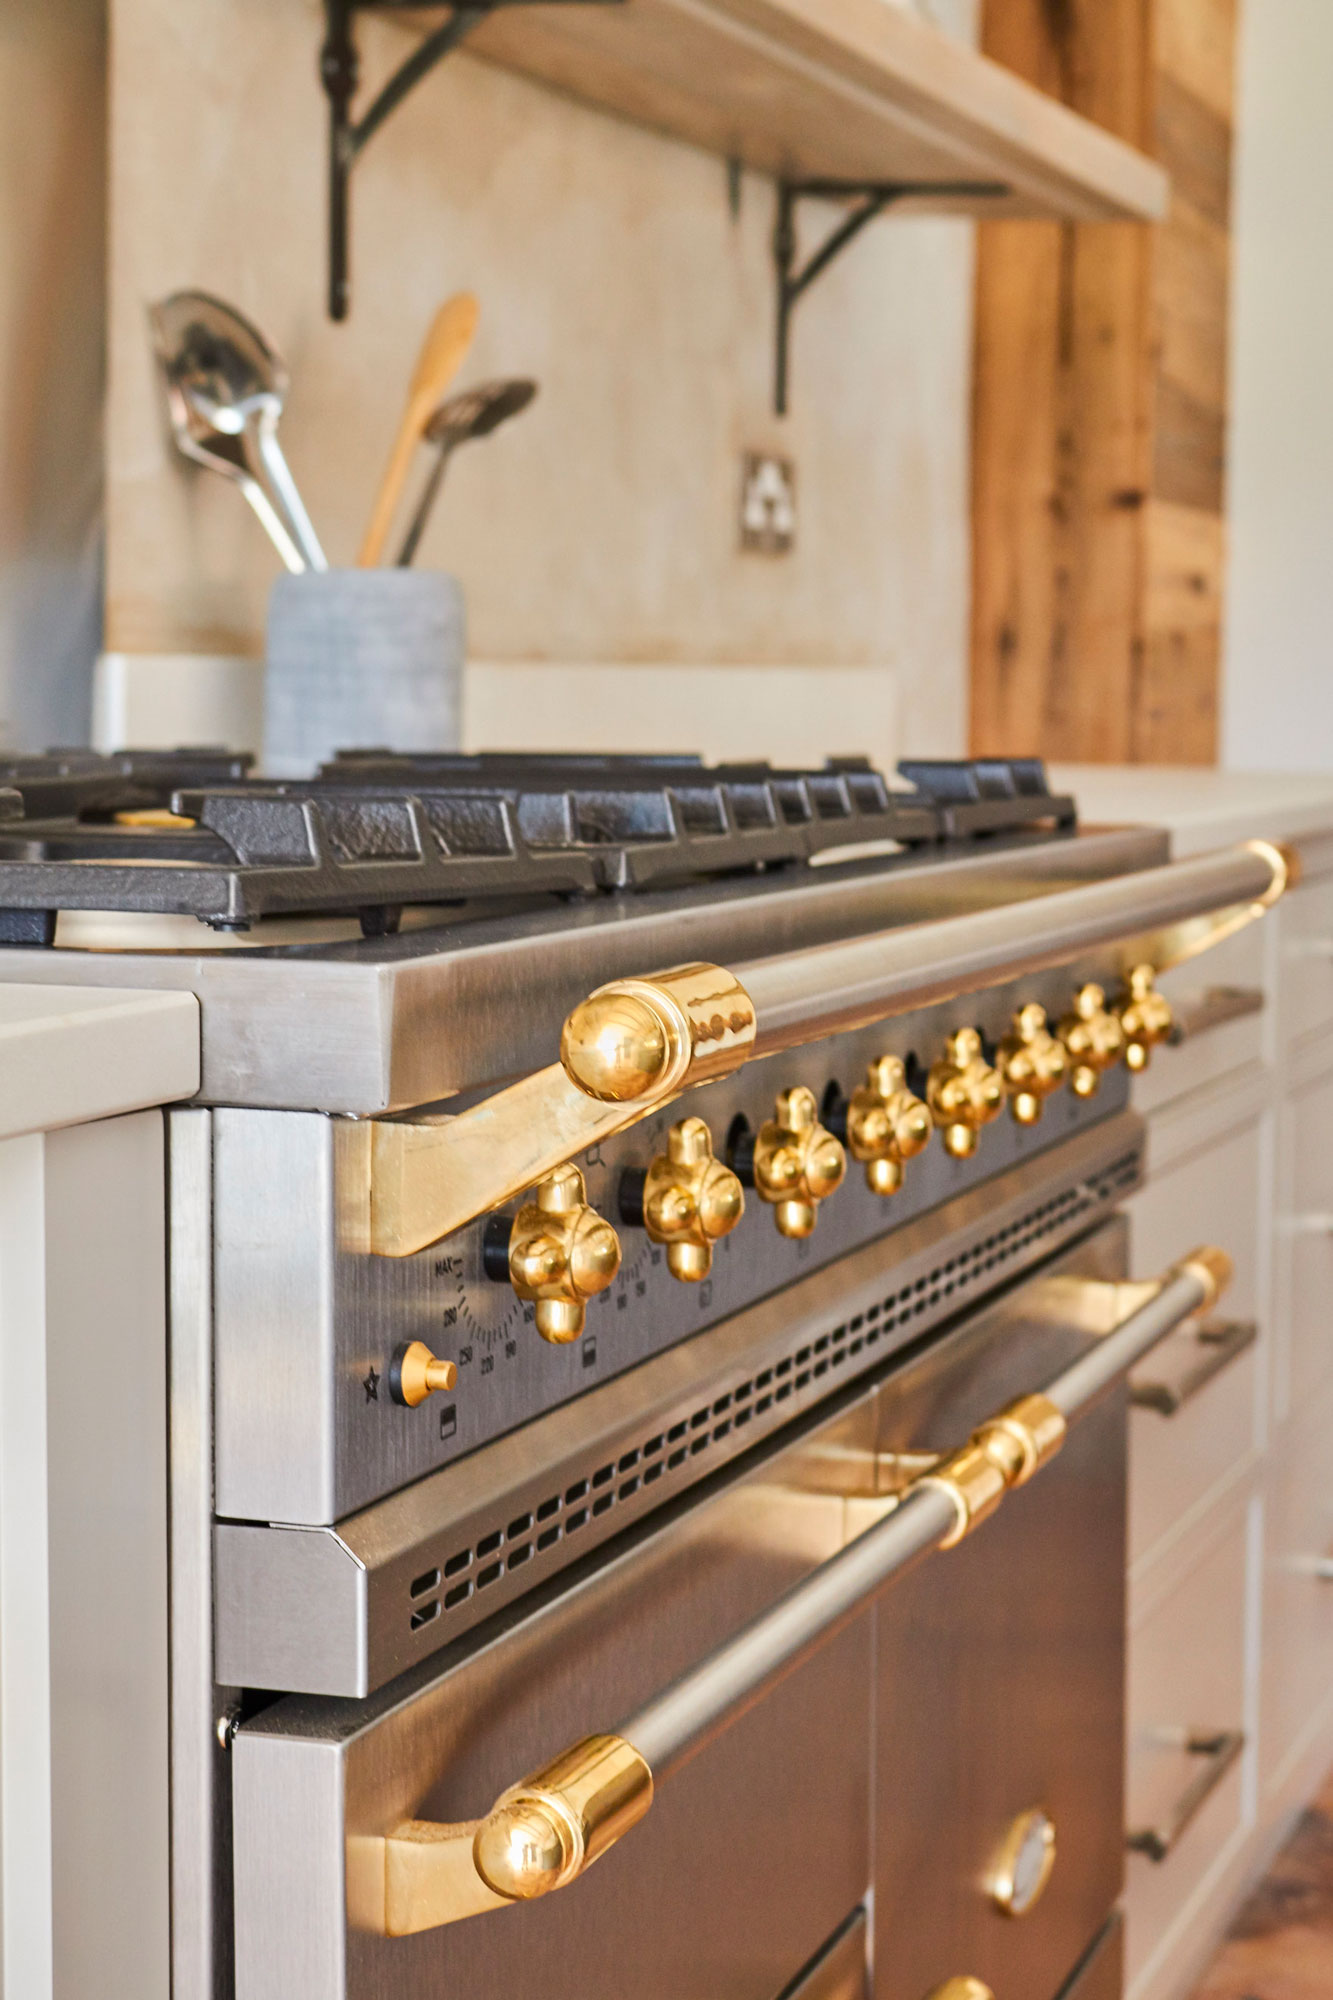 Brushed stainless steel Lacanche Macon gas range cooker with brass trim